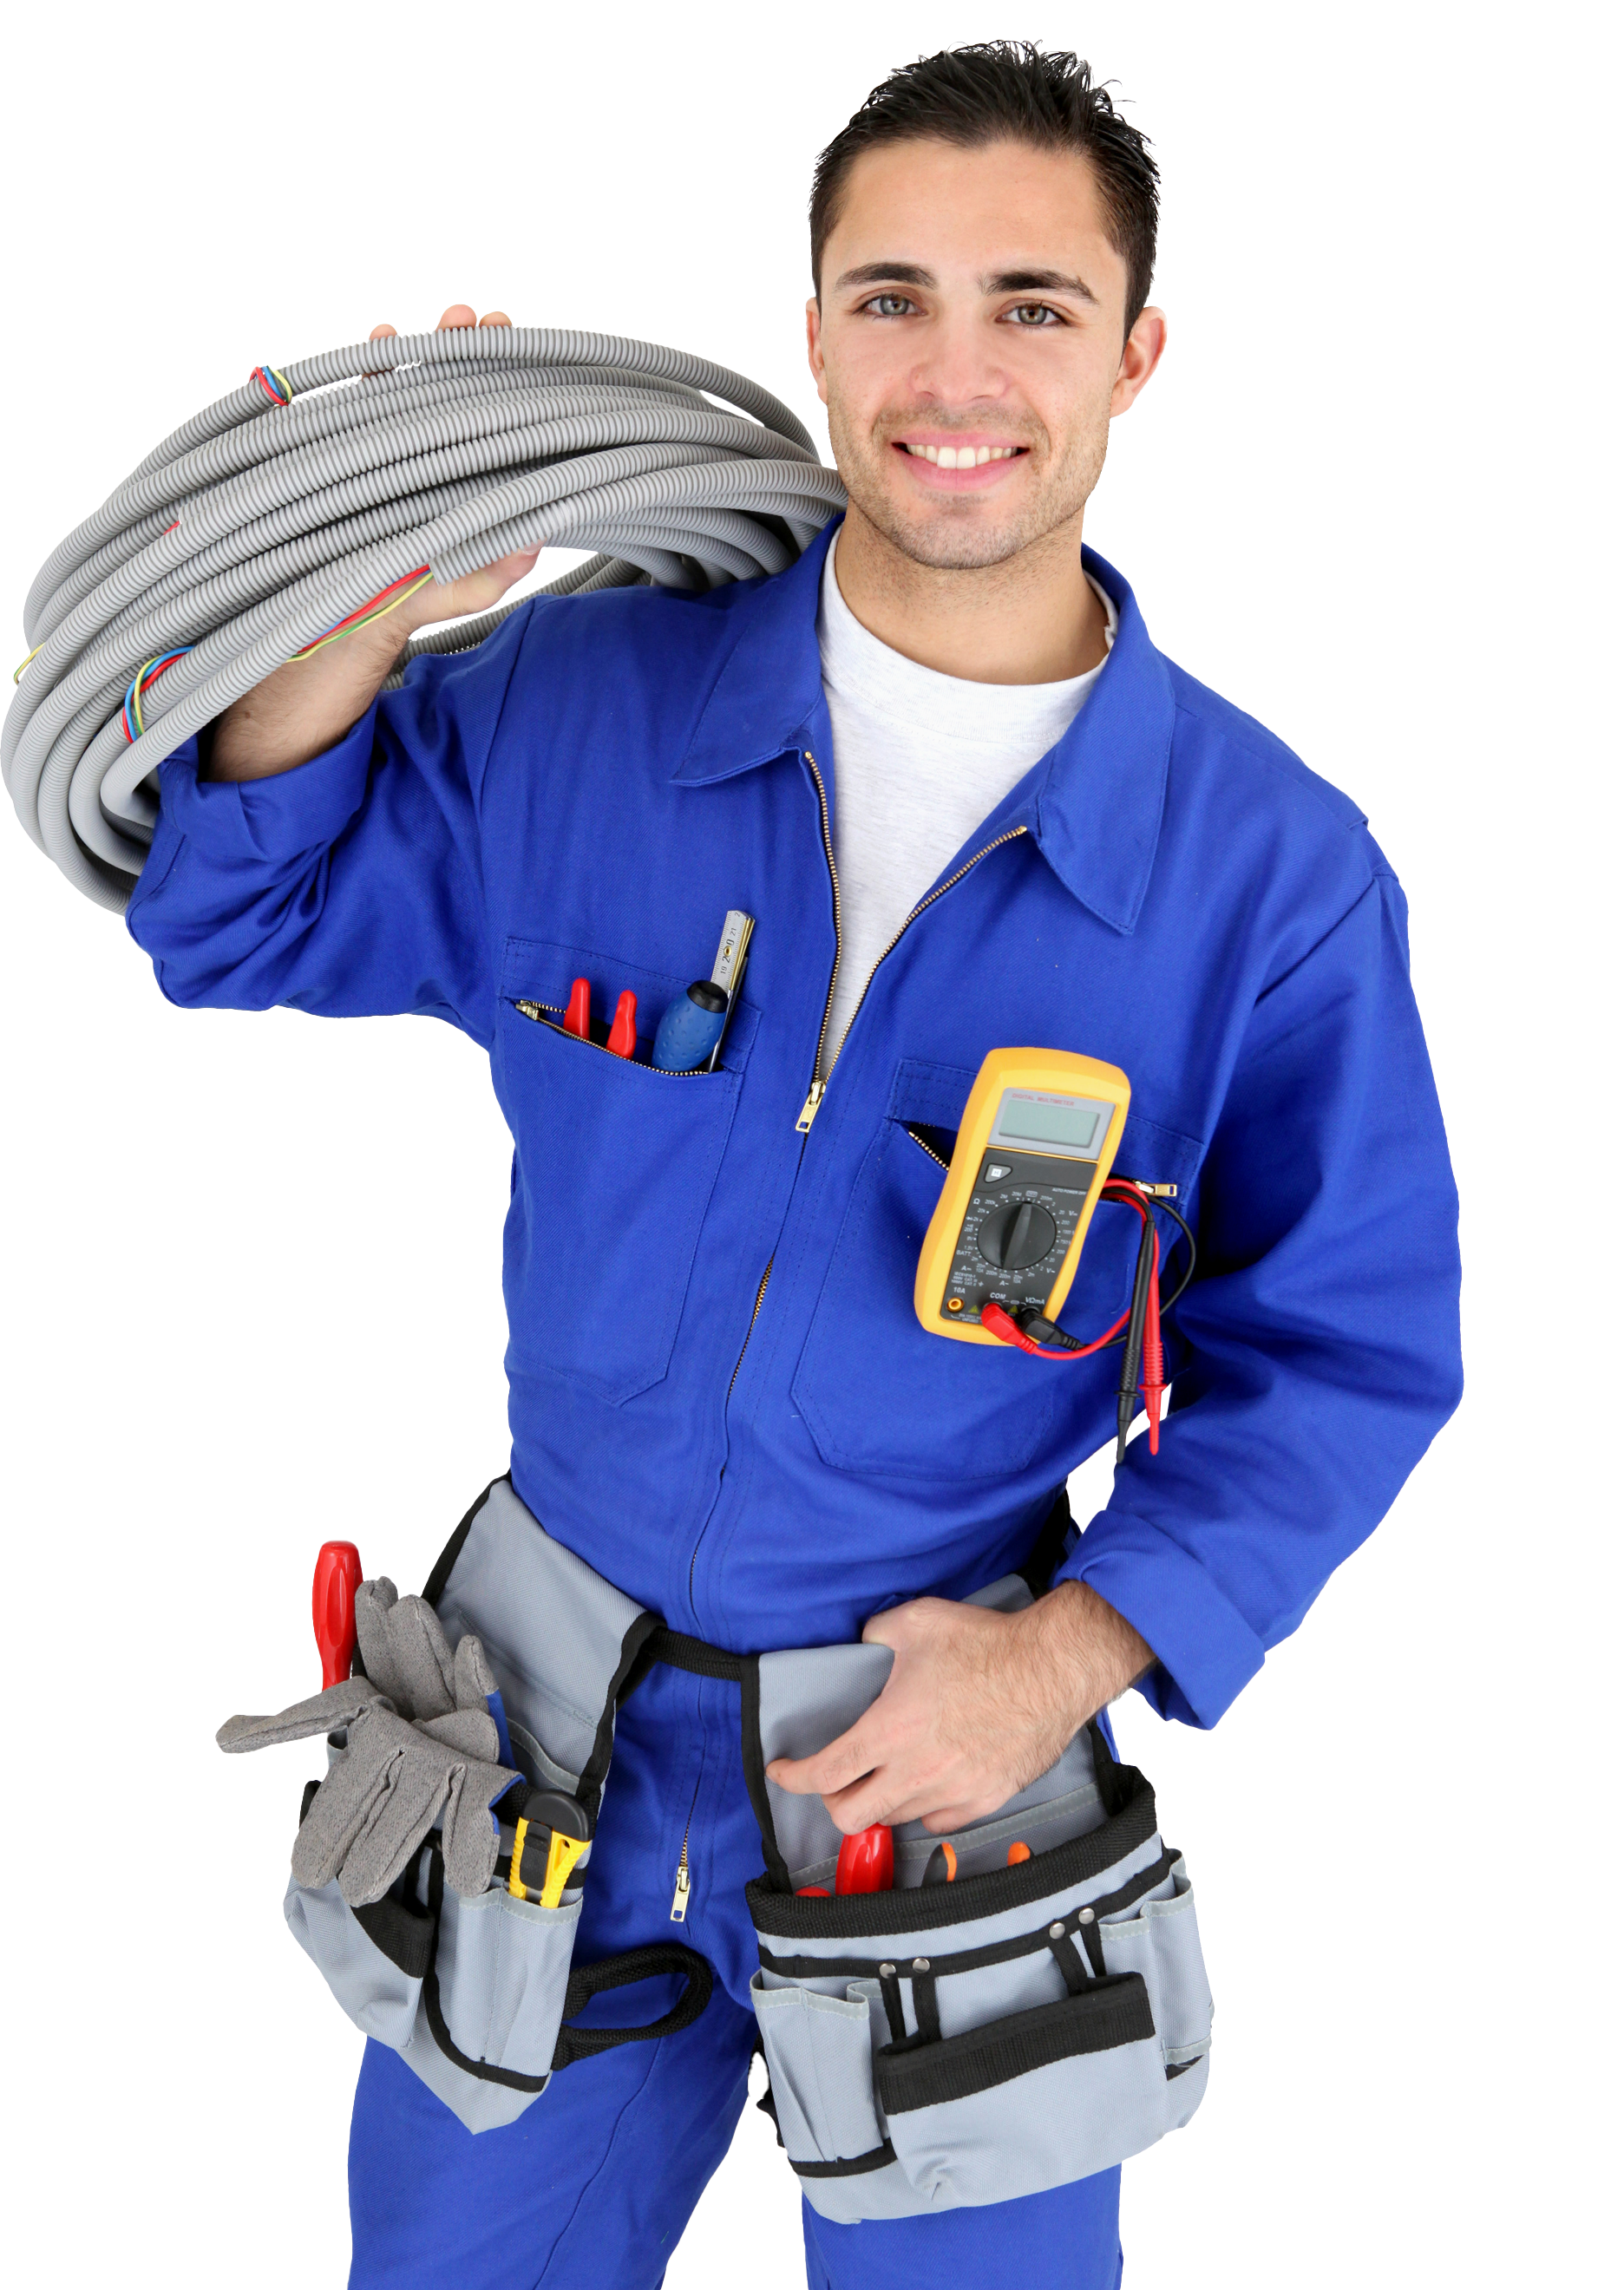 Electrician holding tools and wires